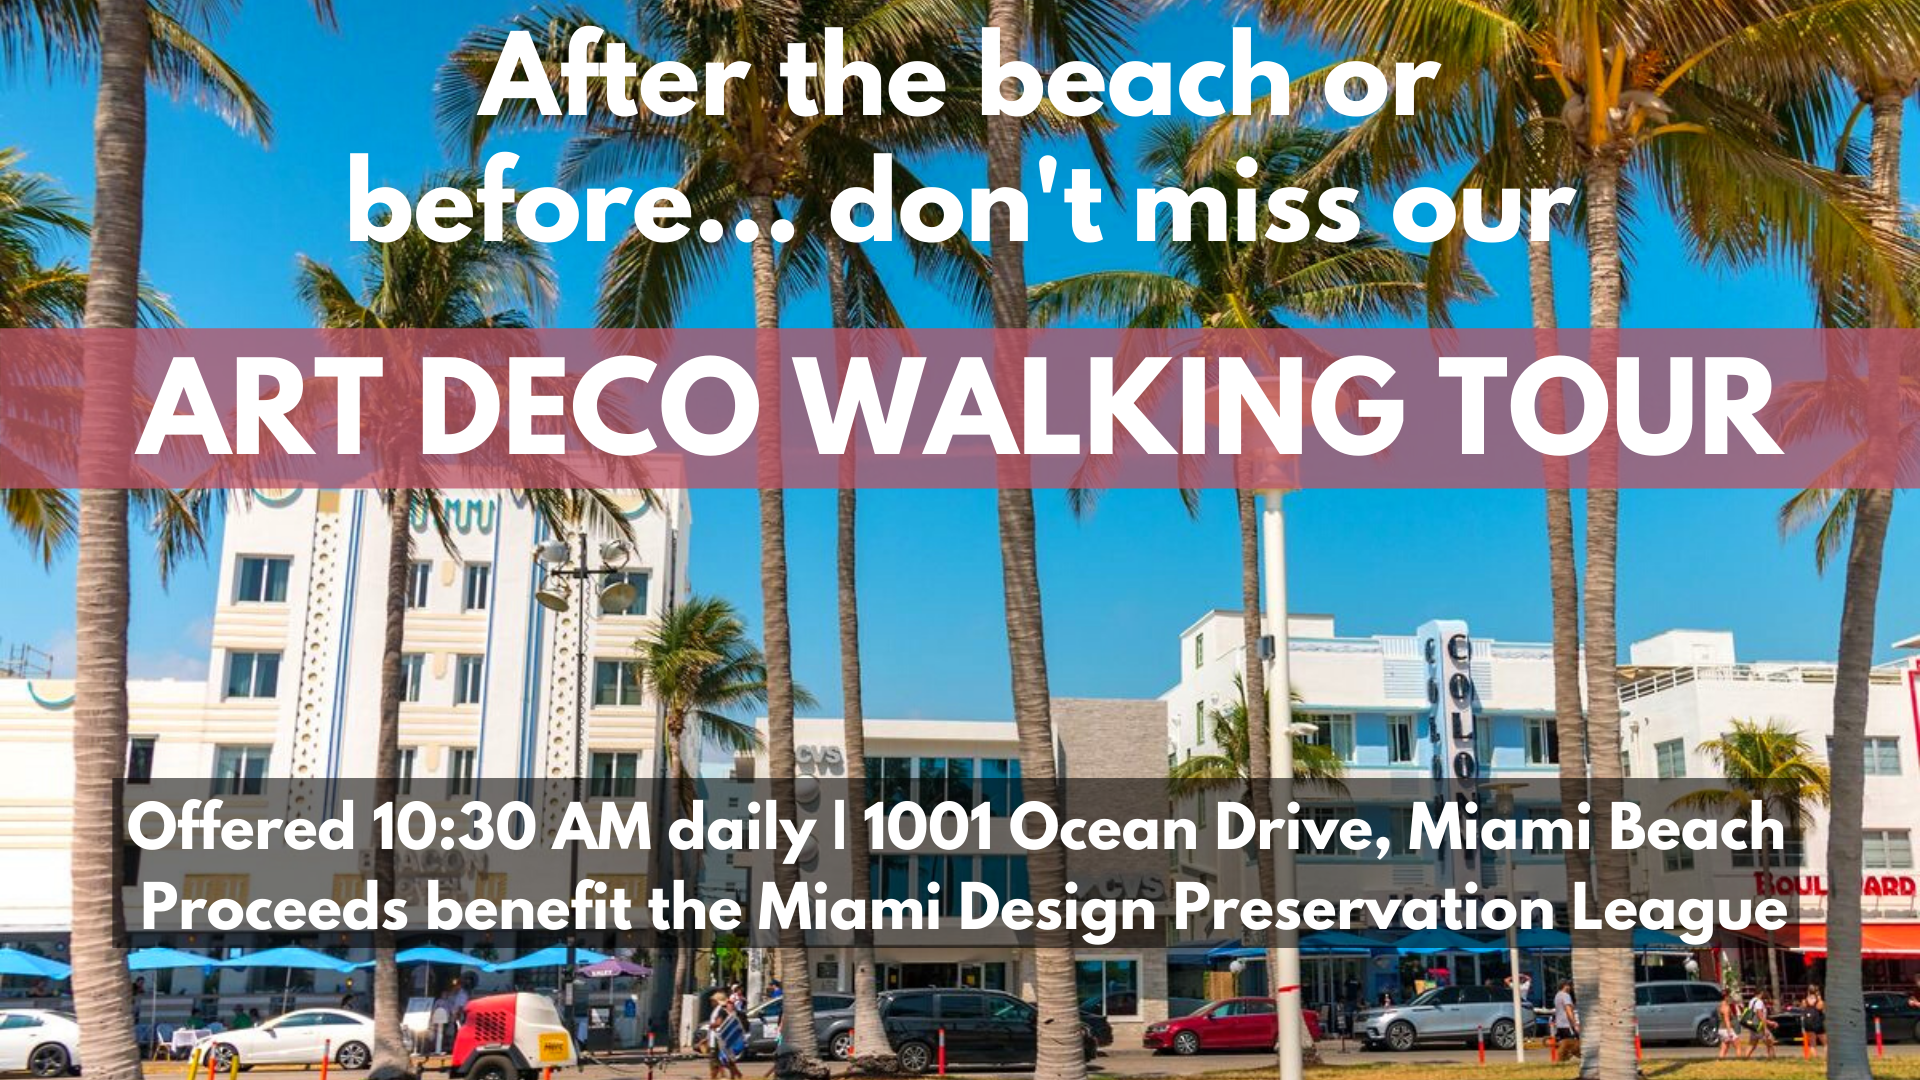 The Official Art Deco Walking Tour by the Miami Design Preservation League